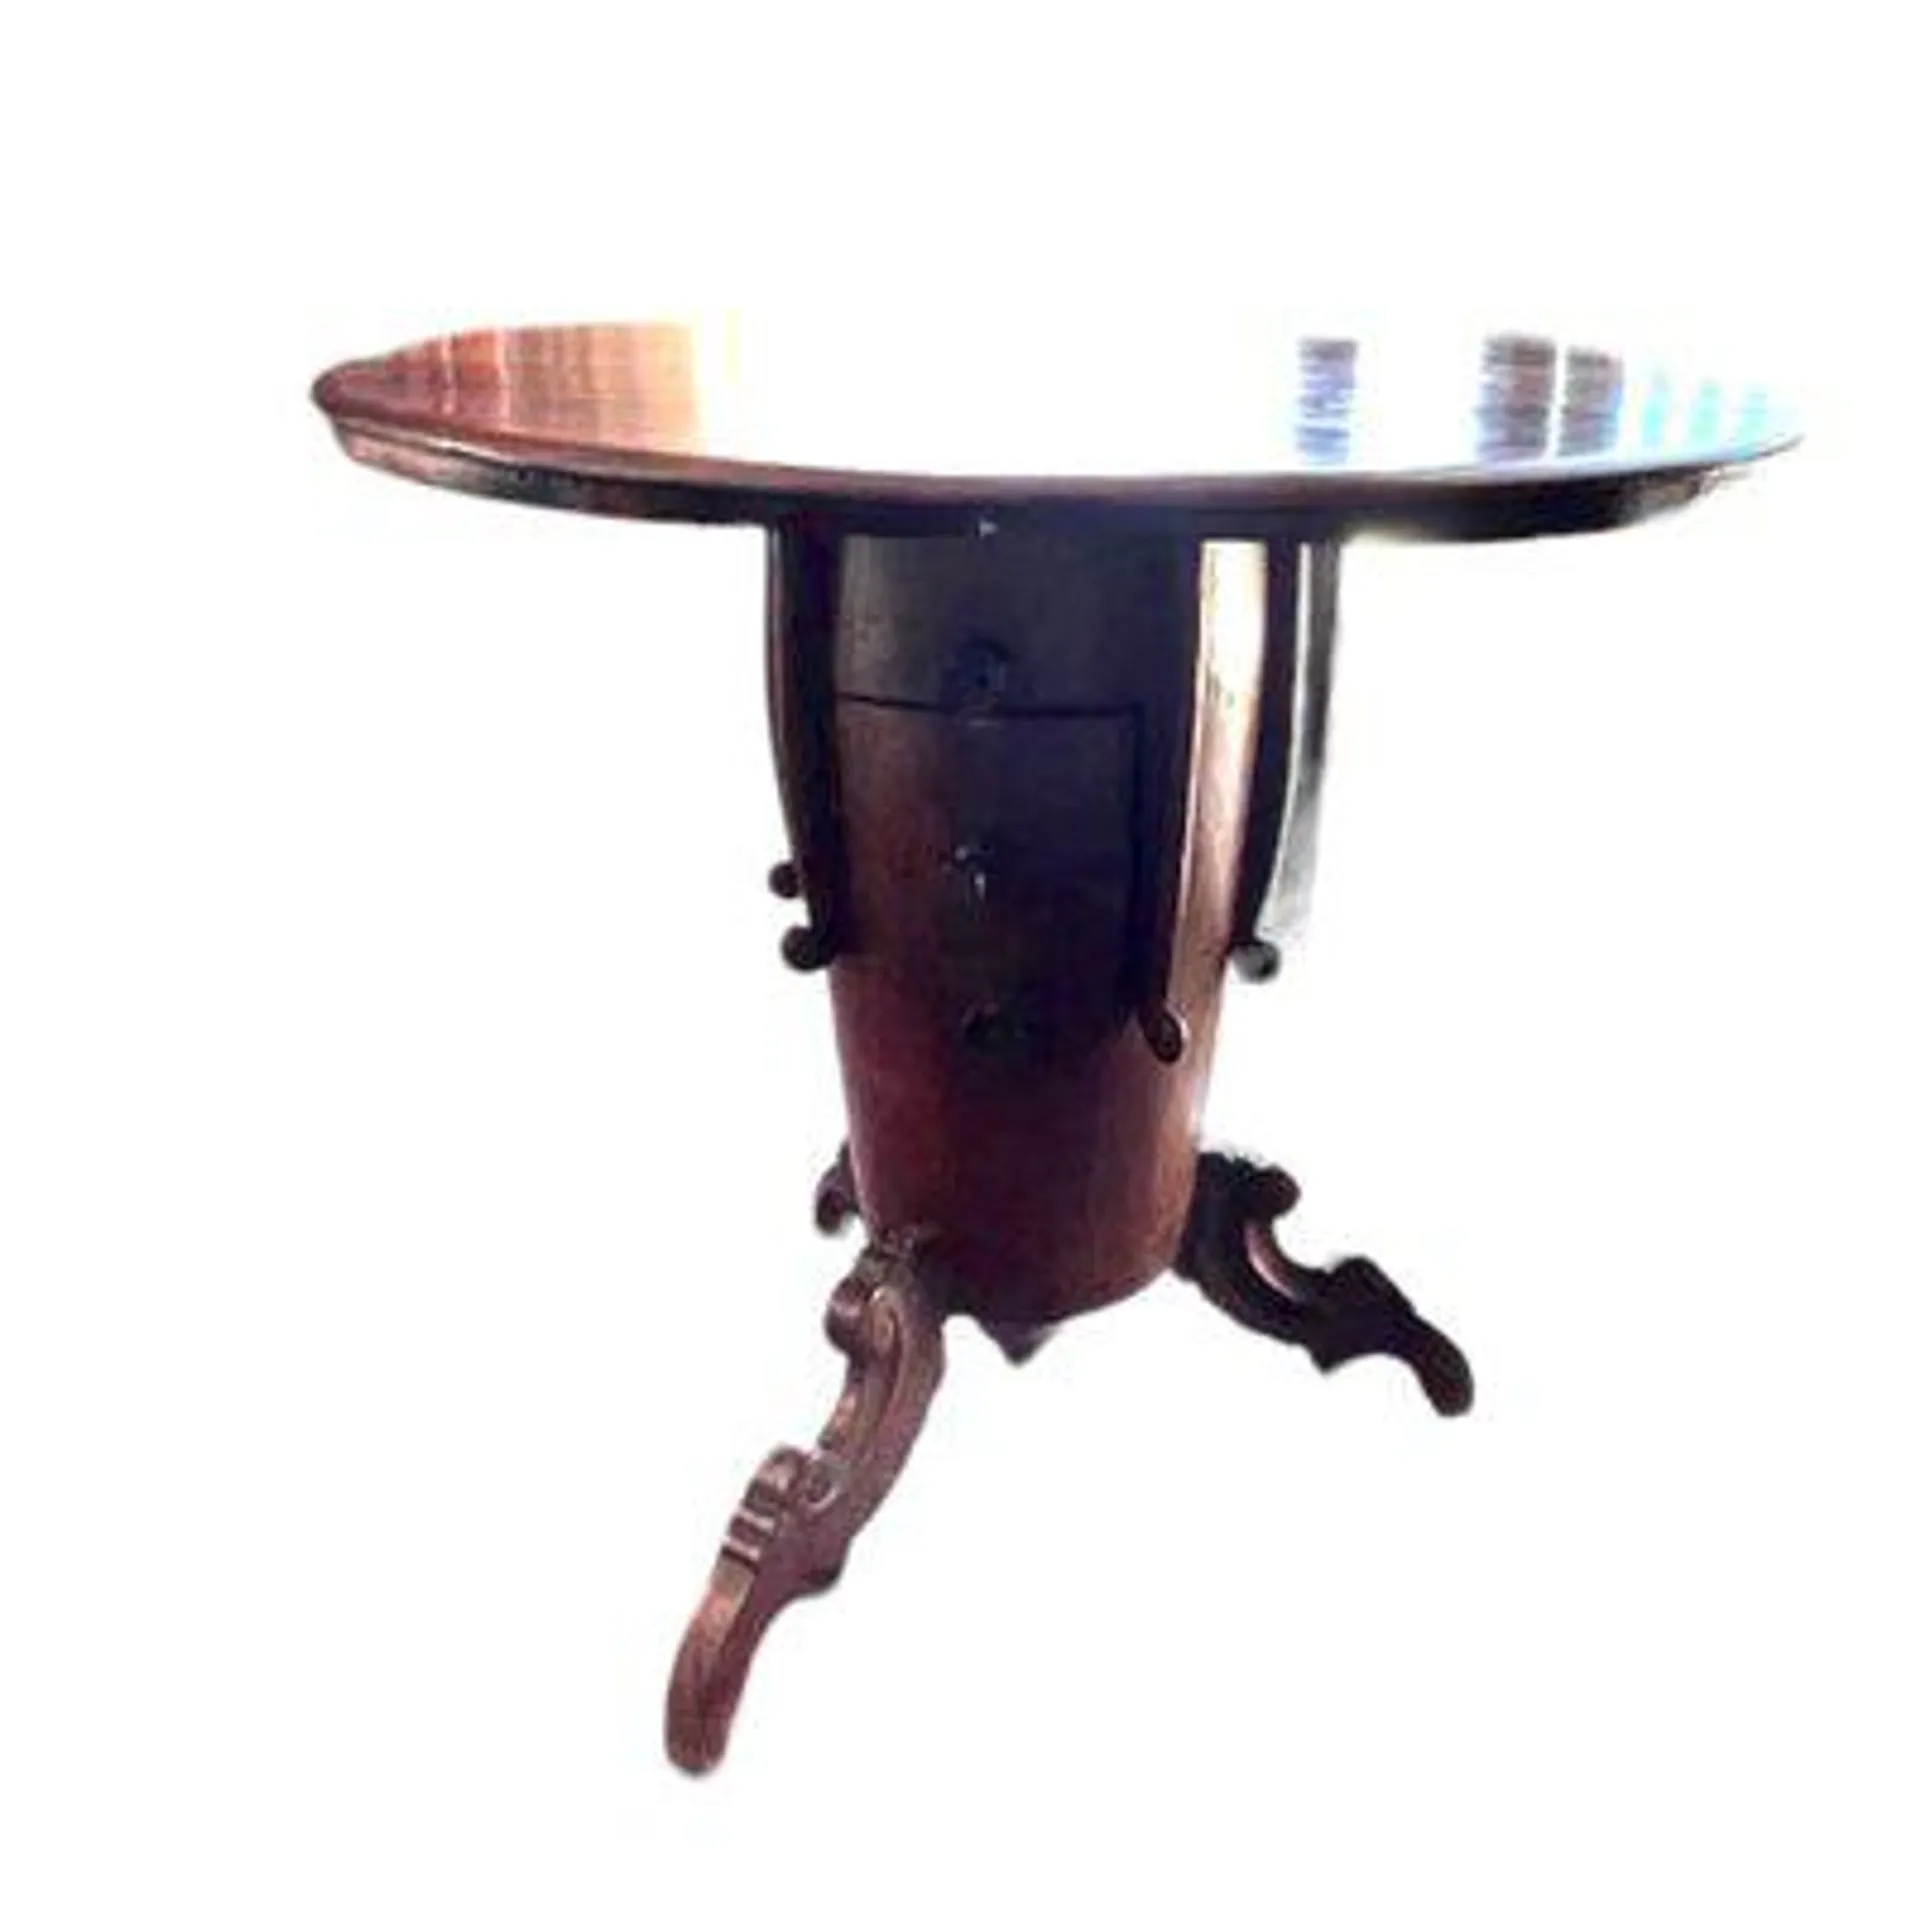 Antique Round Auxiliar Table with atorage